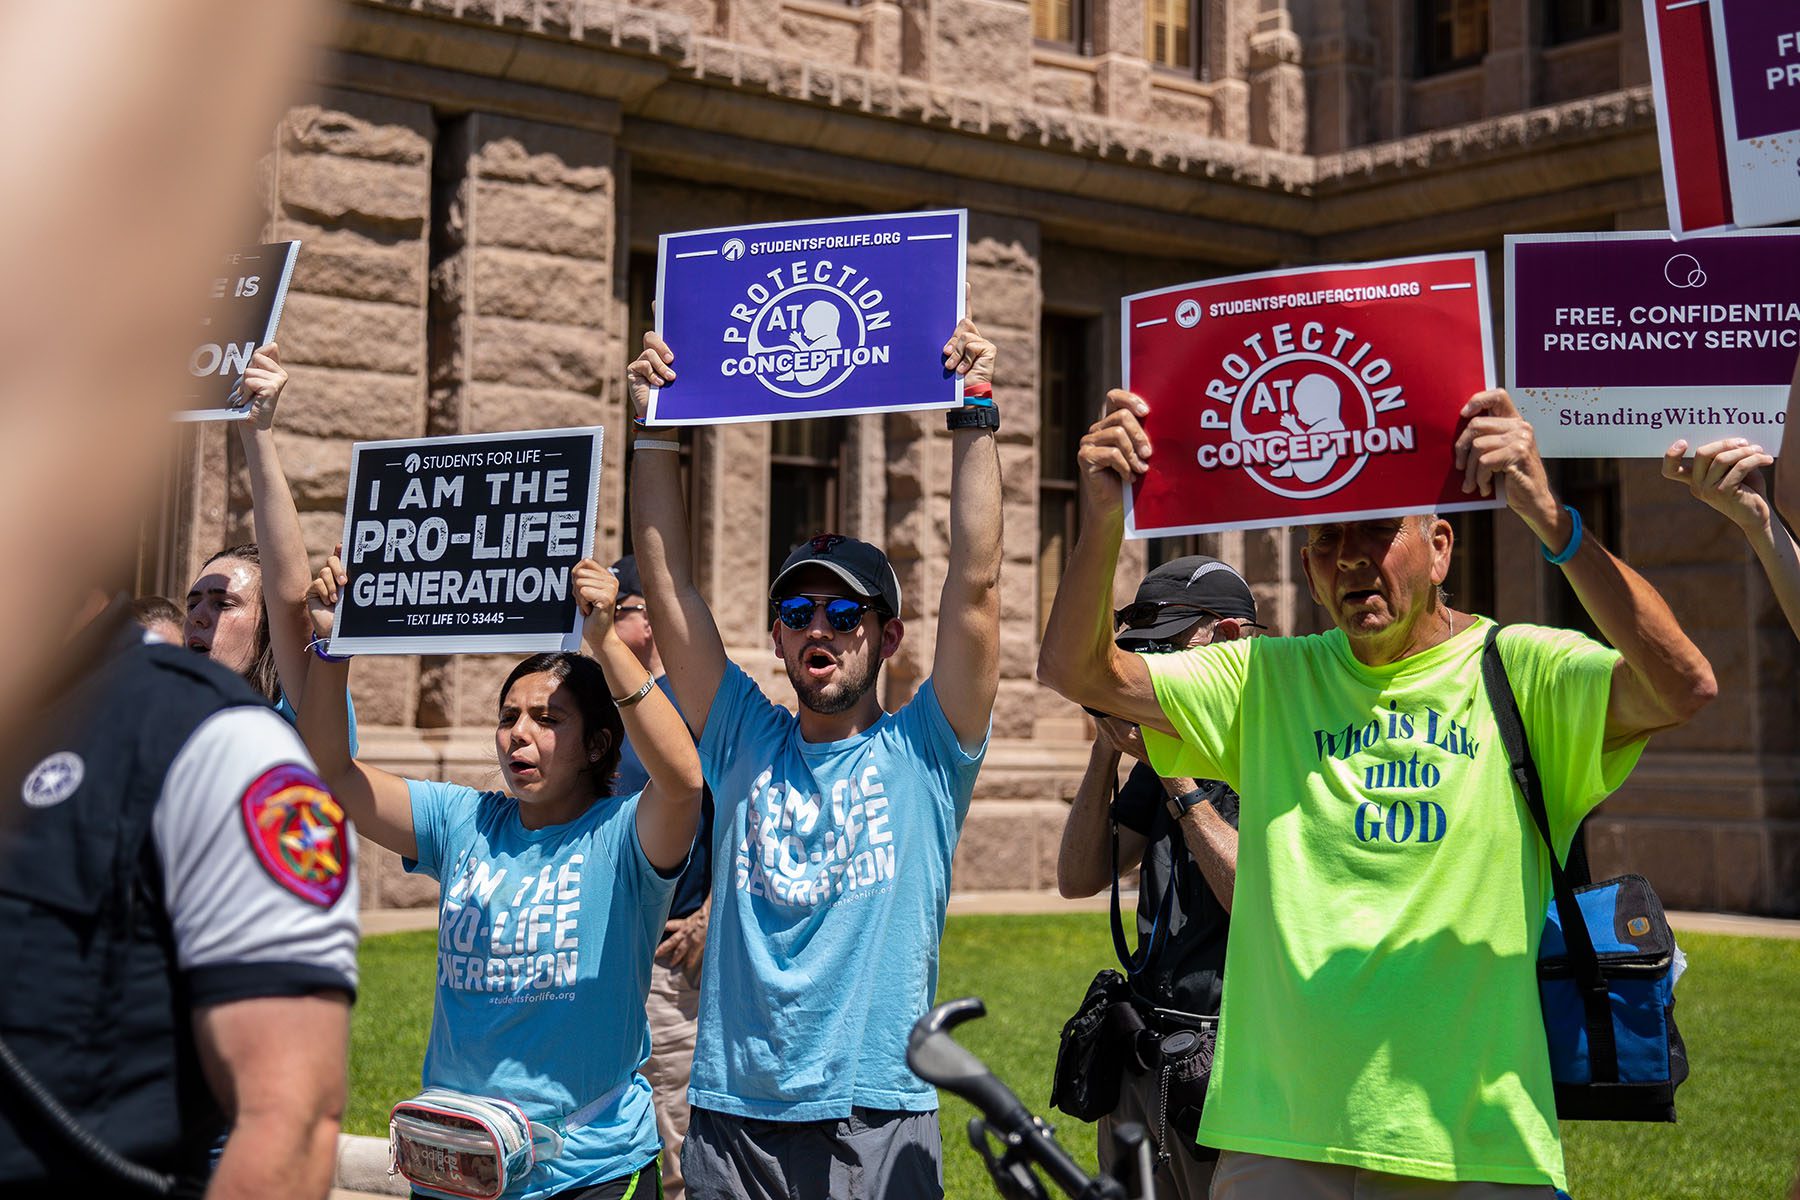 Anti-abortion protesters hold signs that read "protection at conception," and "I am the pro life generation" outside the Texas Capitol.